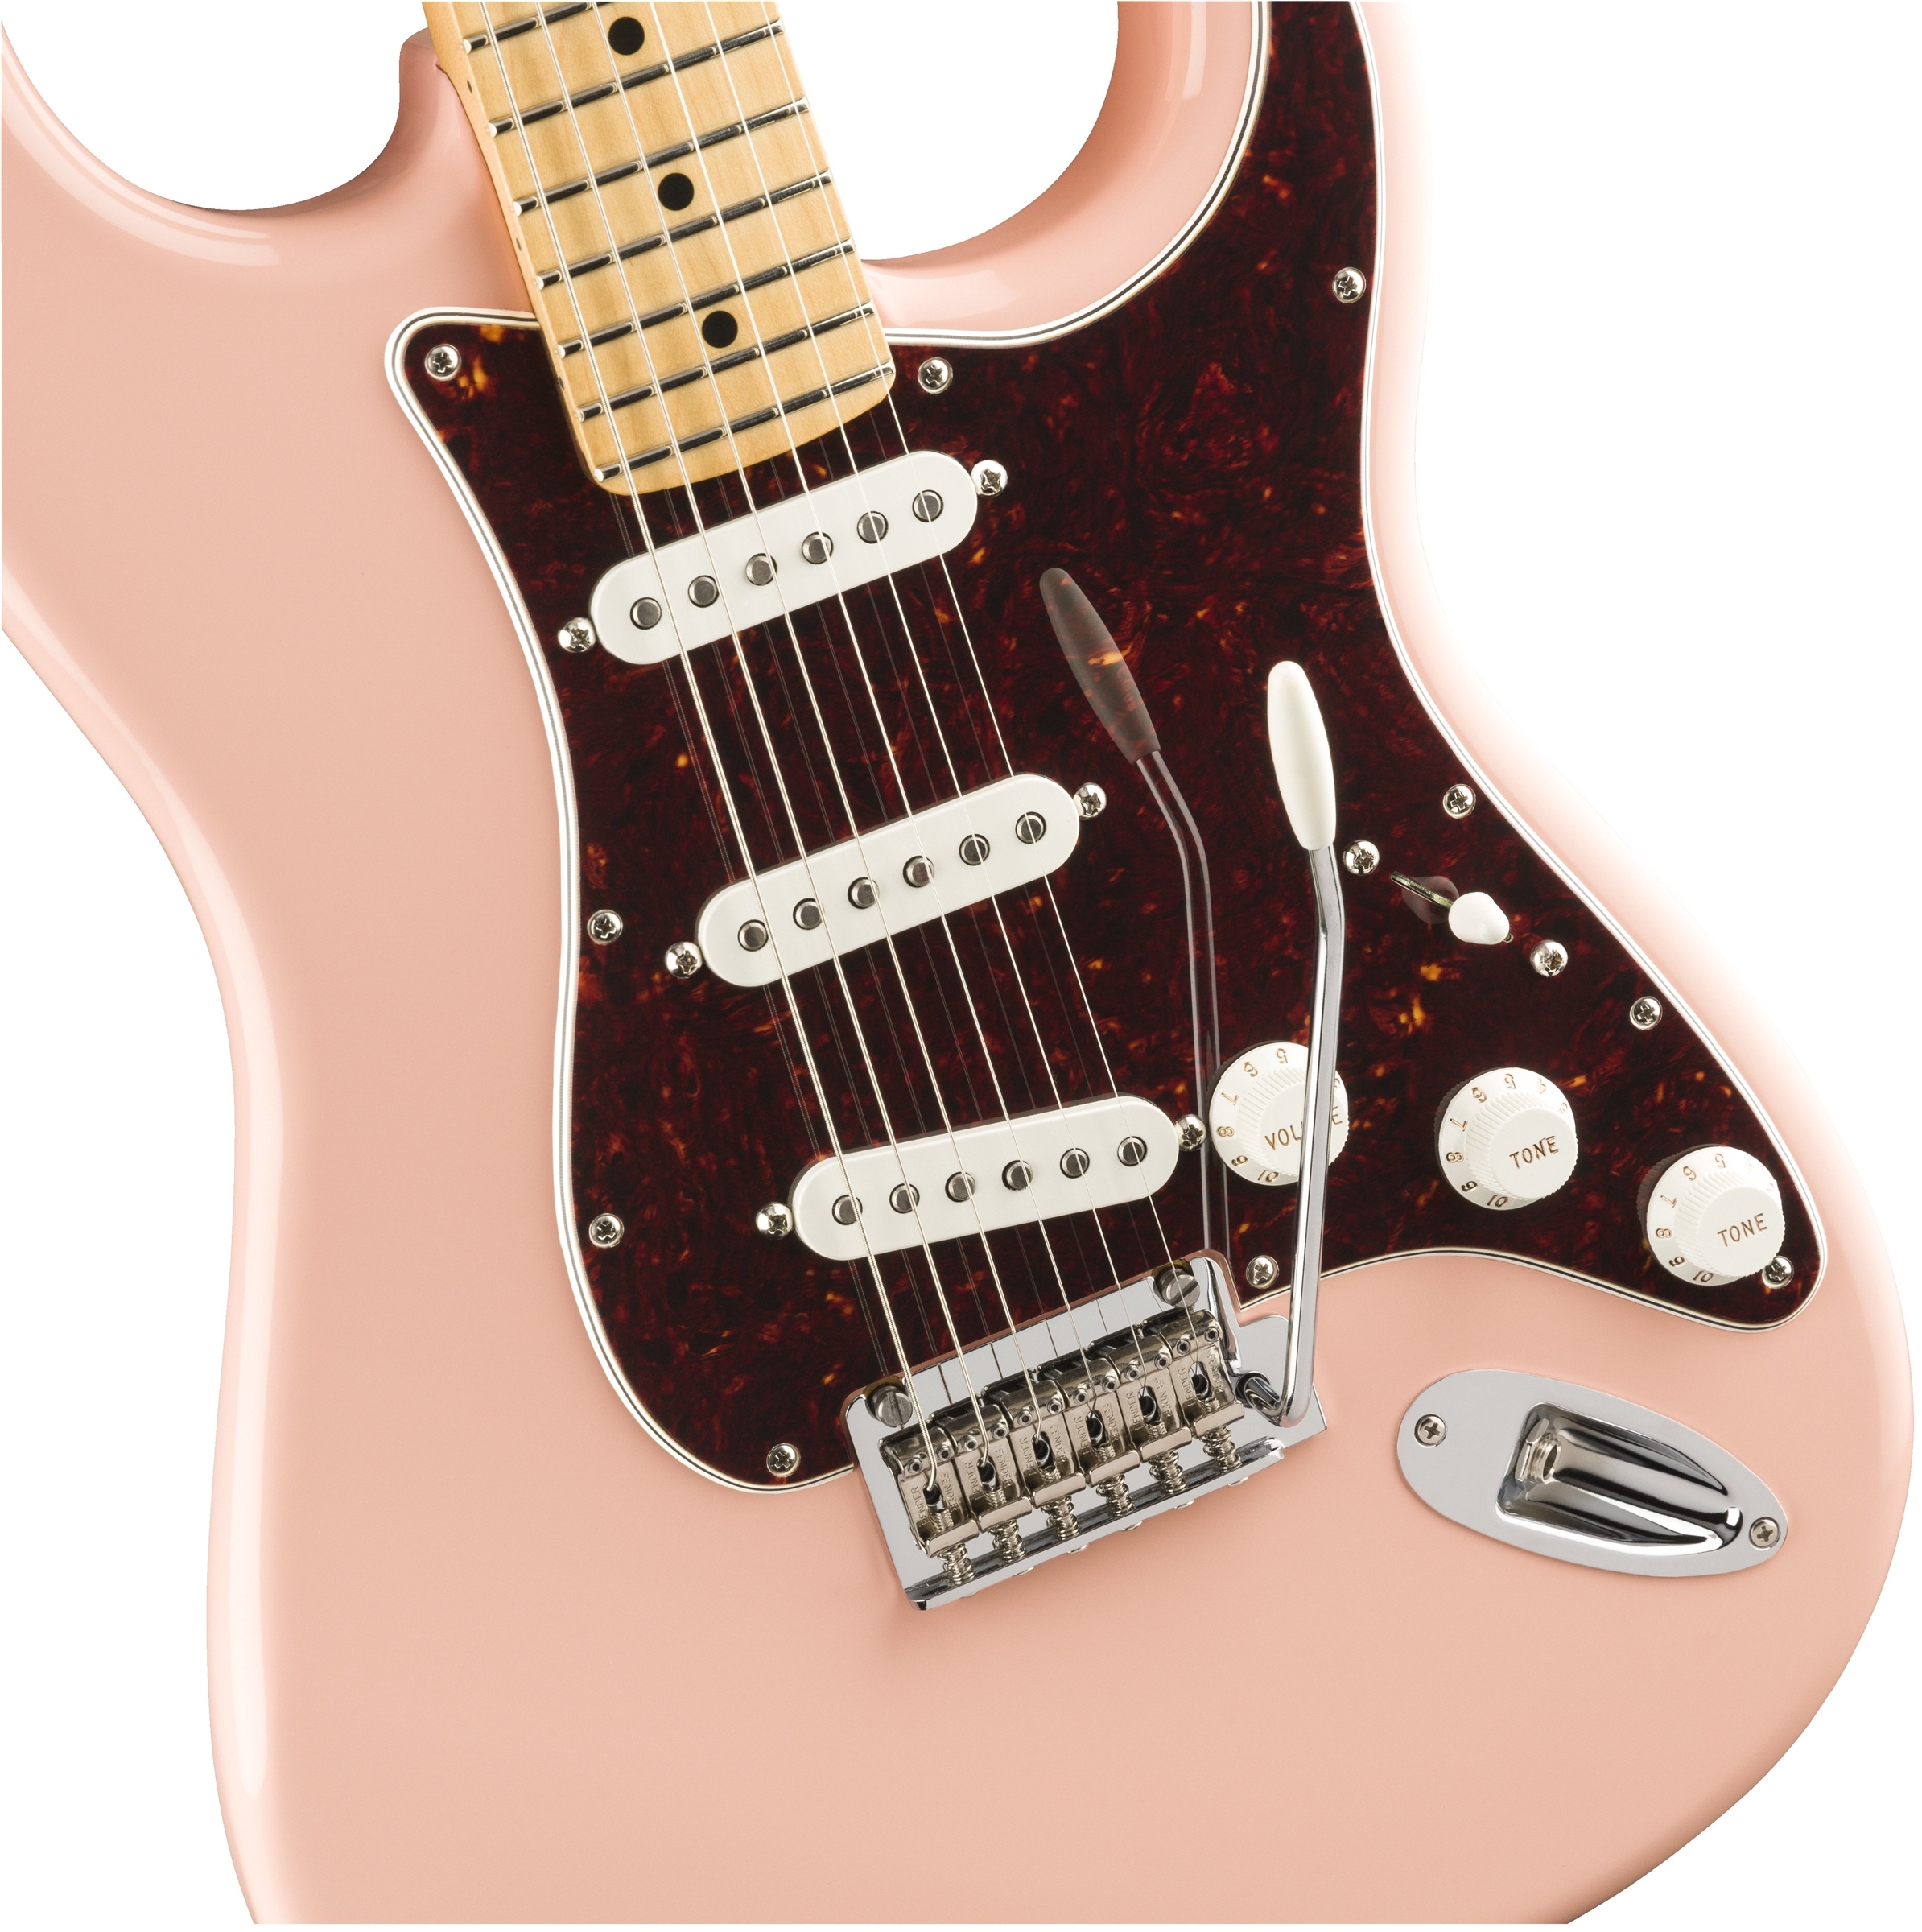 Fender Limited Edition Player Stratocaster in Shell Pink